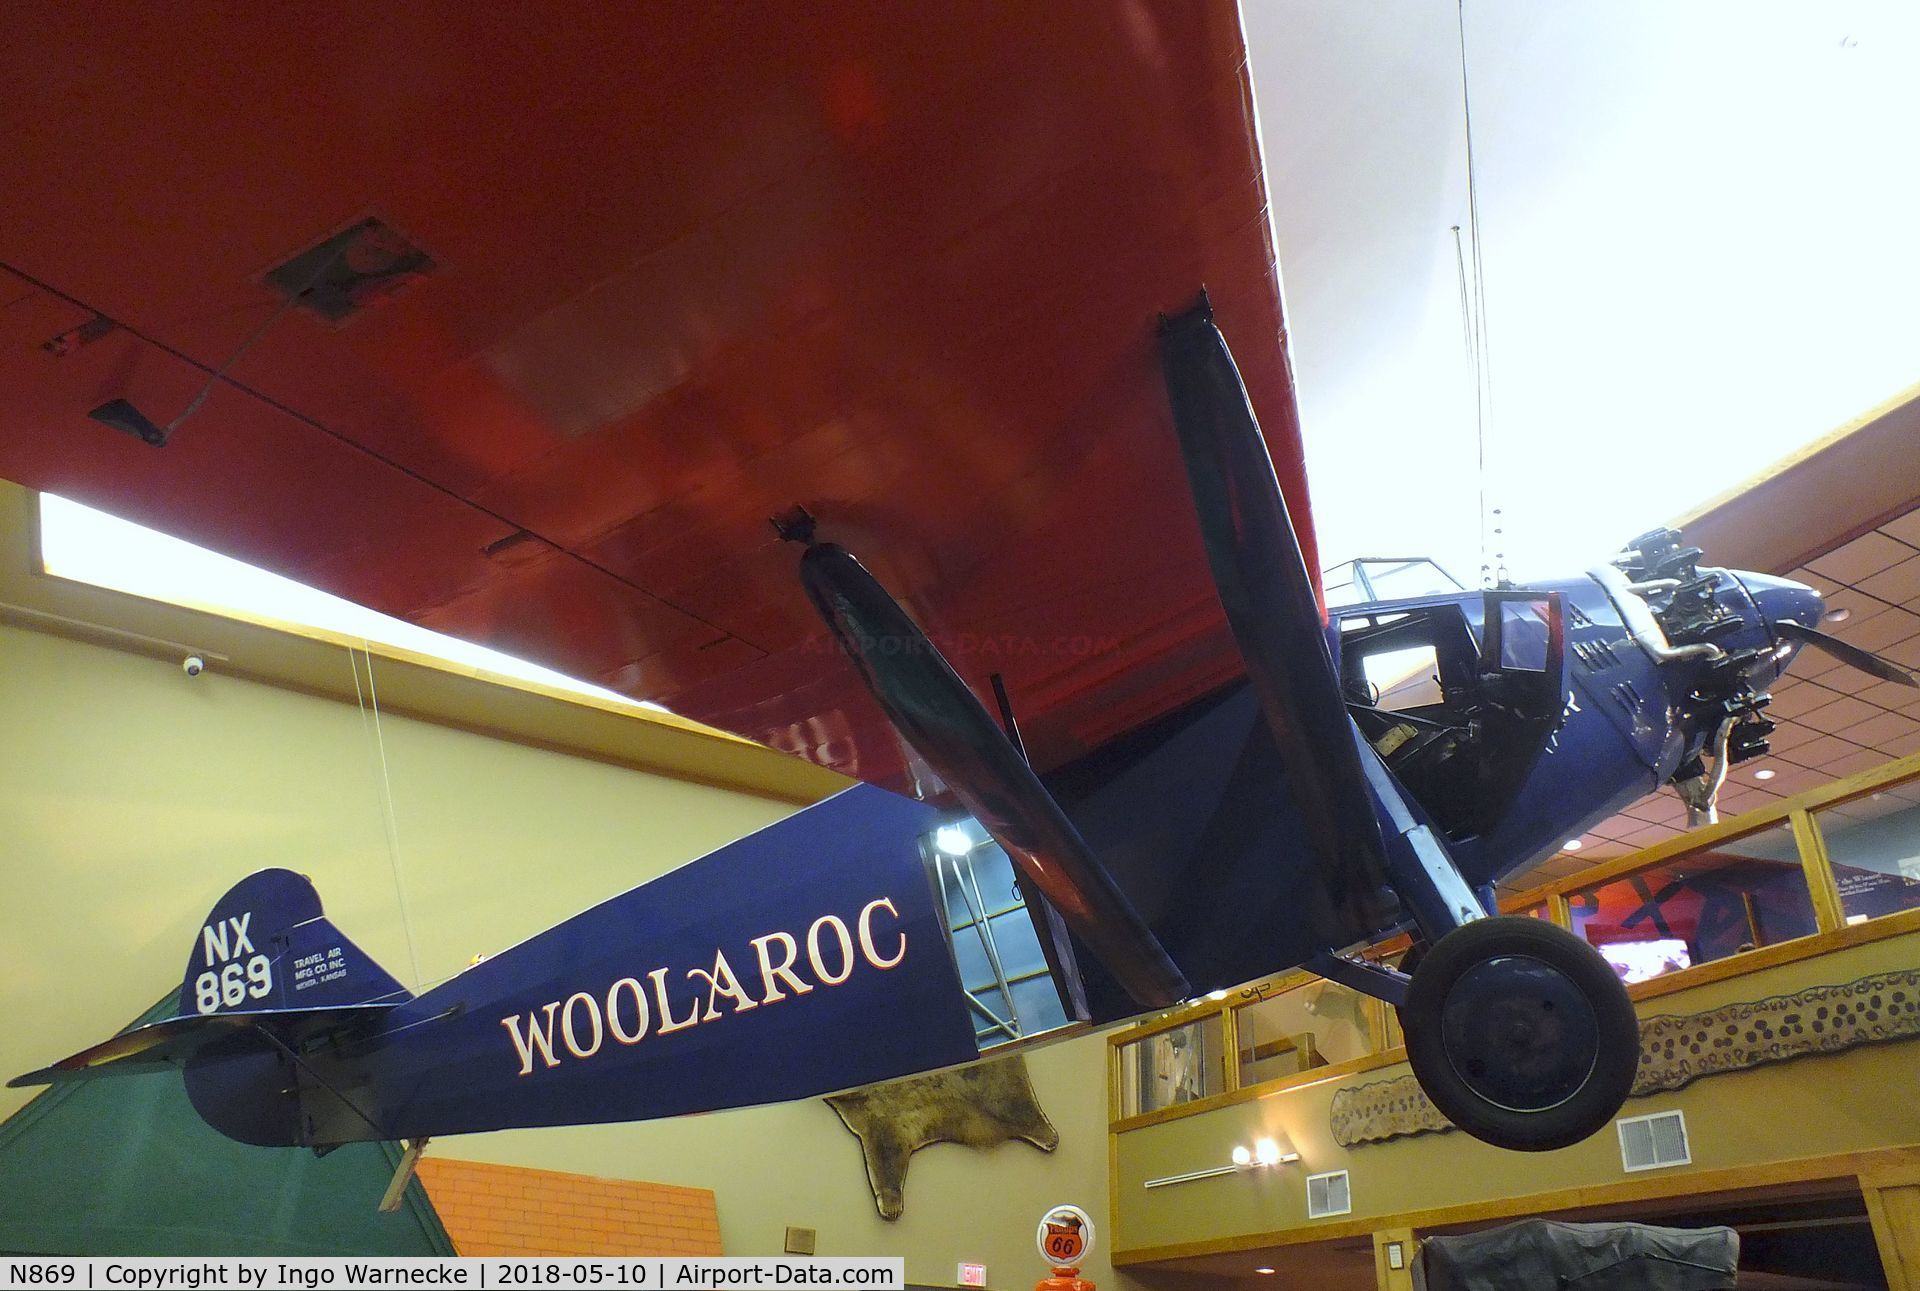 N869, 1927 Travel Air 5000 Woolaroc C/N unknown_n869, Travel Air 5000 'Woolaroc', winner of the 1927 Dole-Race from Oakland to Hawaii, at the Woolaroc Museum, Bartlesville OK